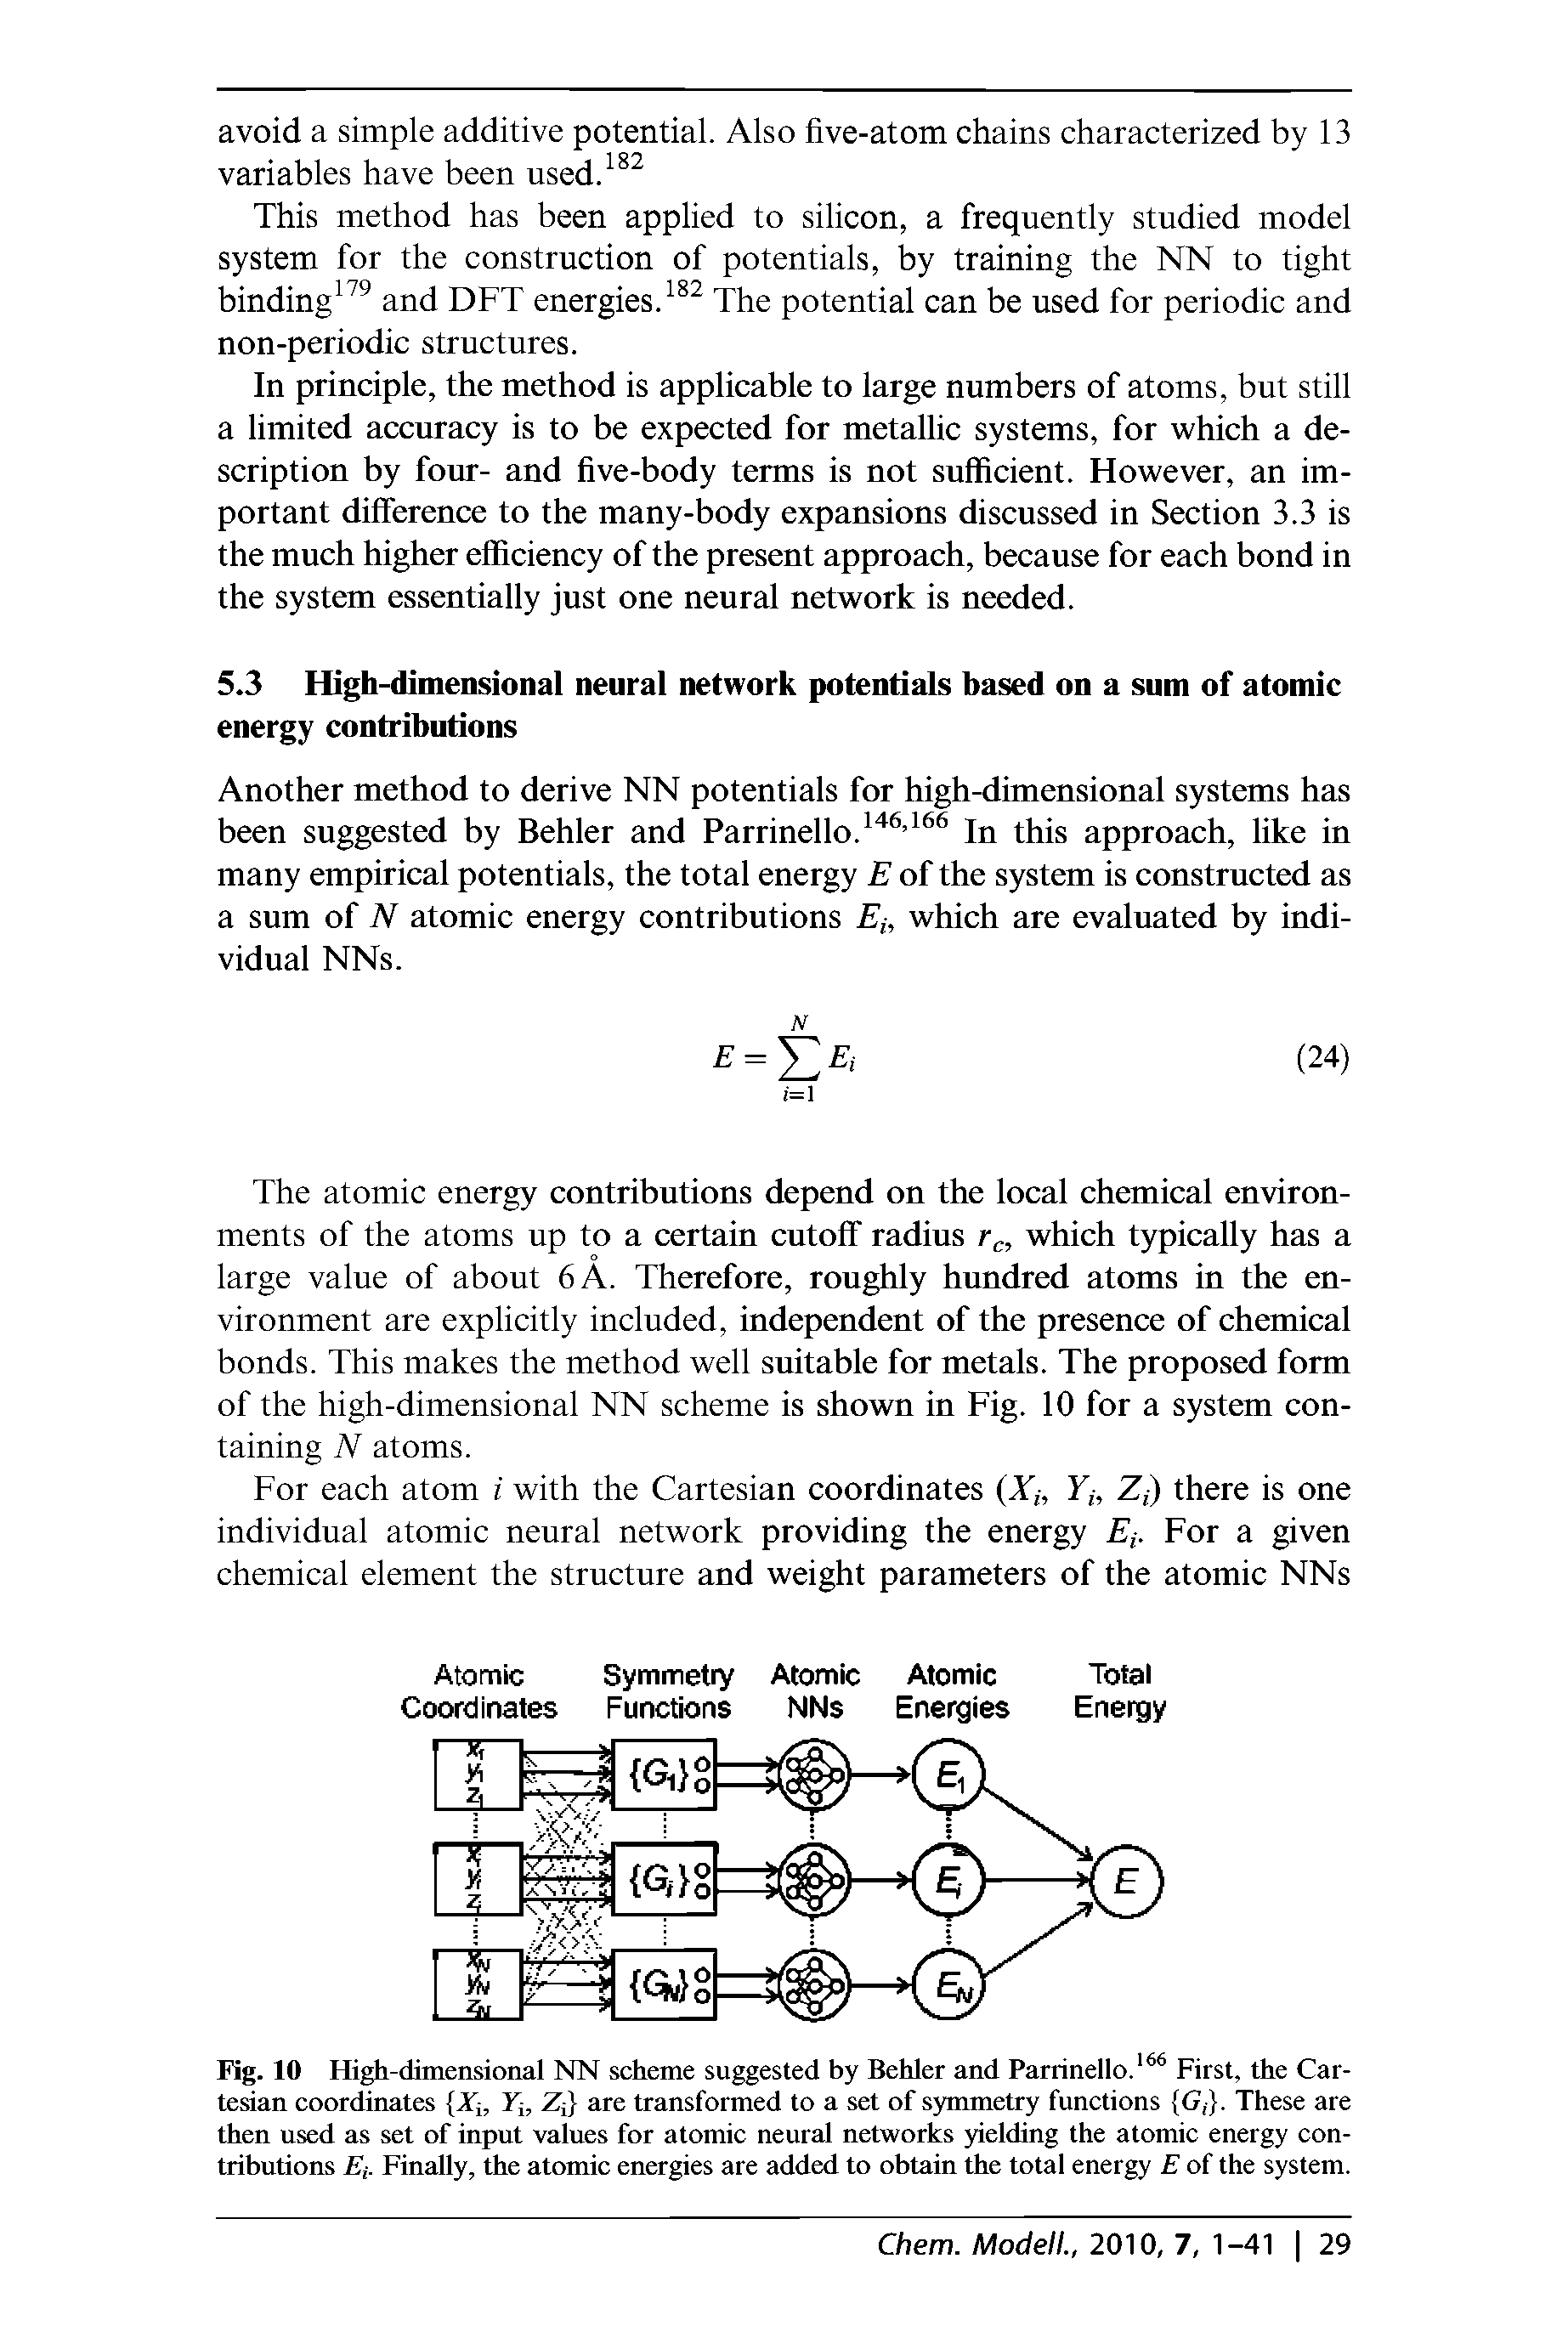 Fig. 10 High-dimensional NN scheme suggested by Behler and Parrinello. First, the Cartesian coordinates Xj, Xj, Zj are transformed to a set of symmetry functions G,. These are then used as set of input values for atomic neural networks yielding the atomic energy contributions Ei. Finally, the atomic energies are added to obtain the total energy E of the system.